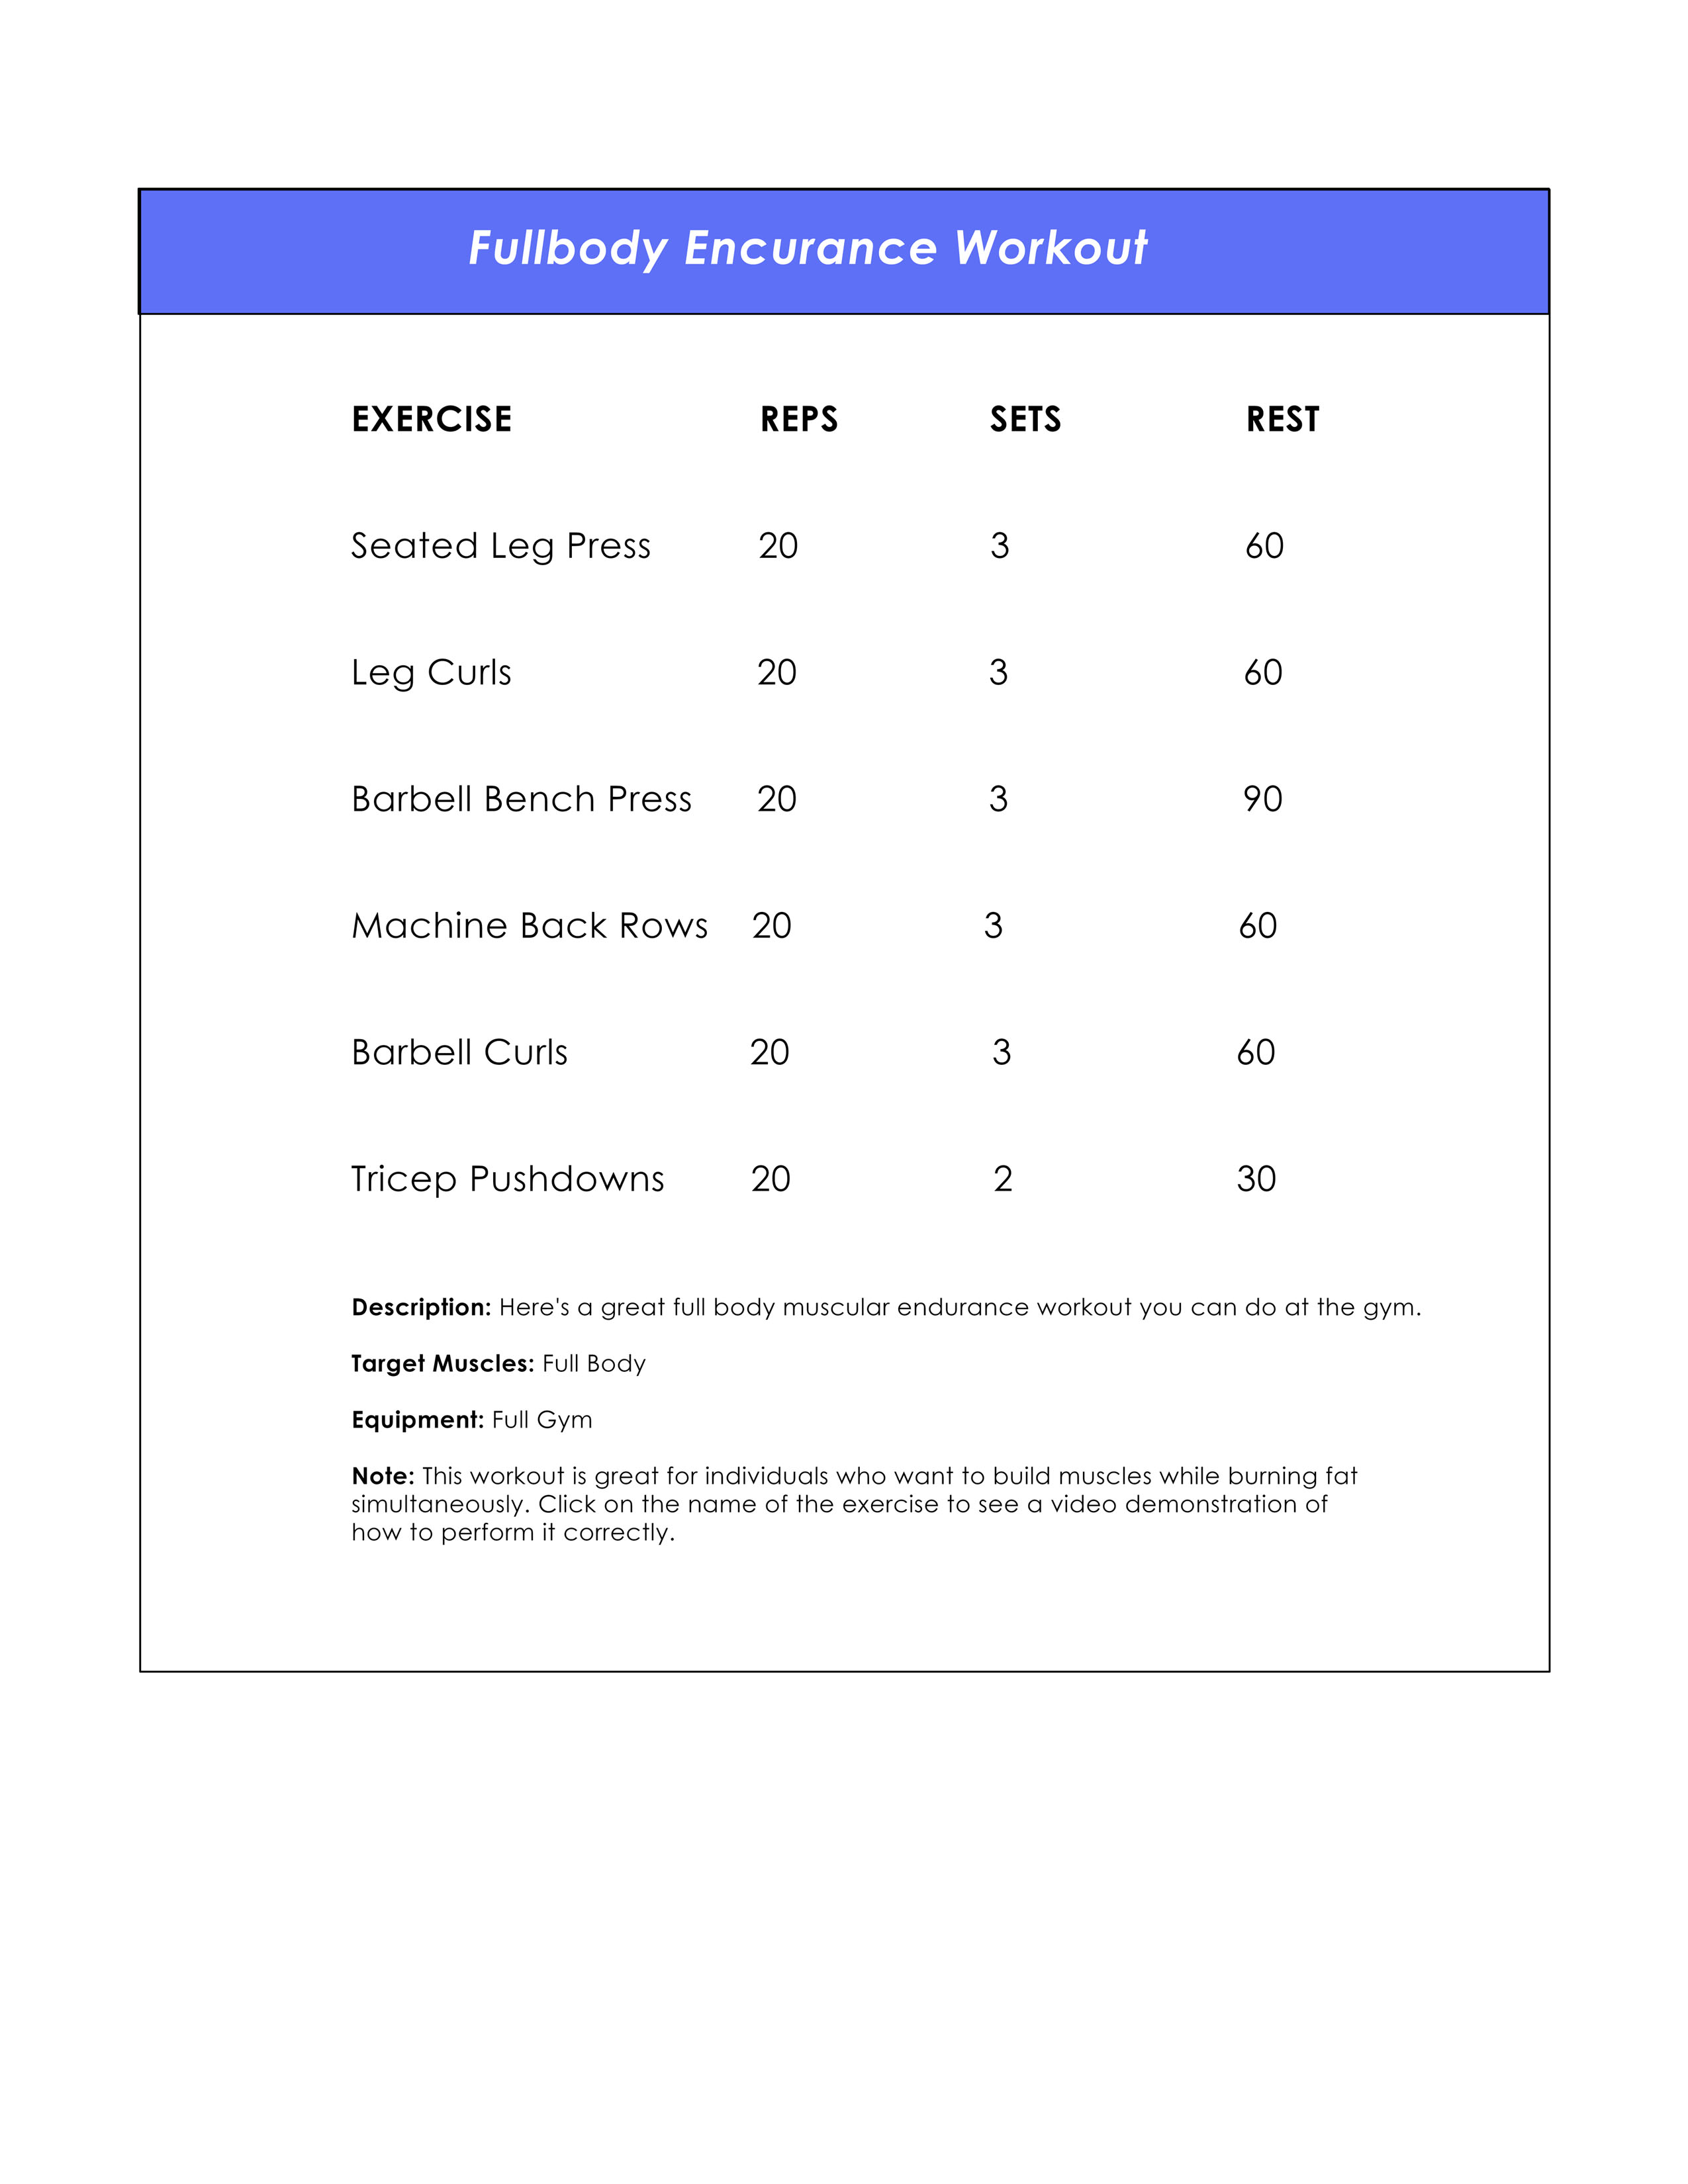 Fullbody endurance workout you can download and print.